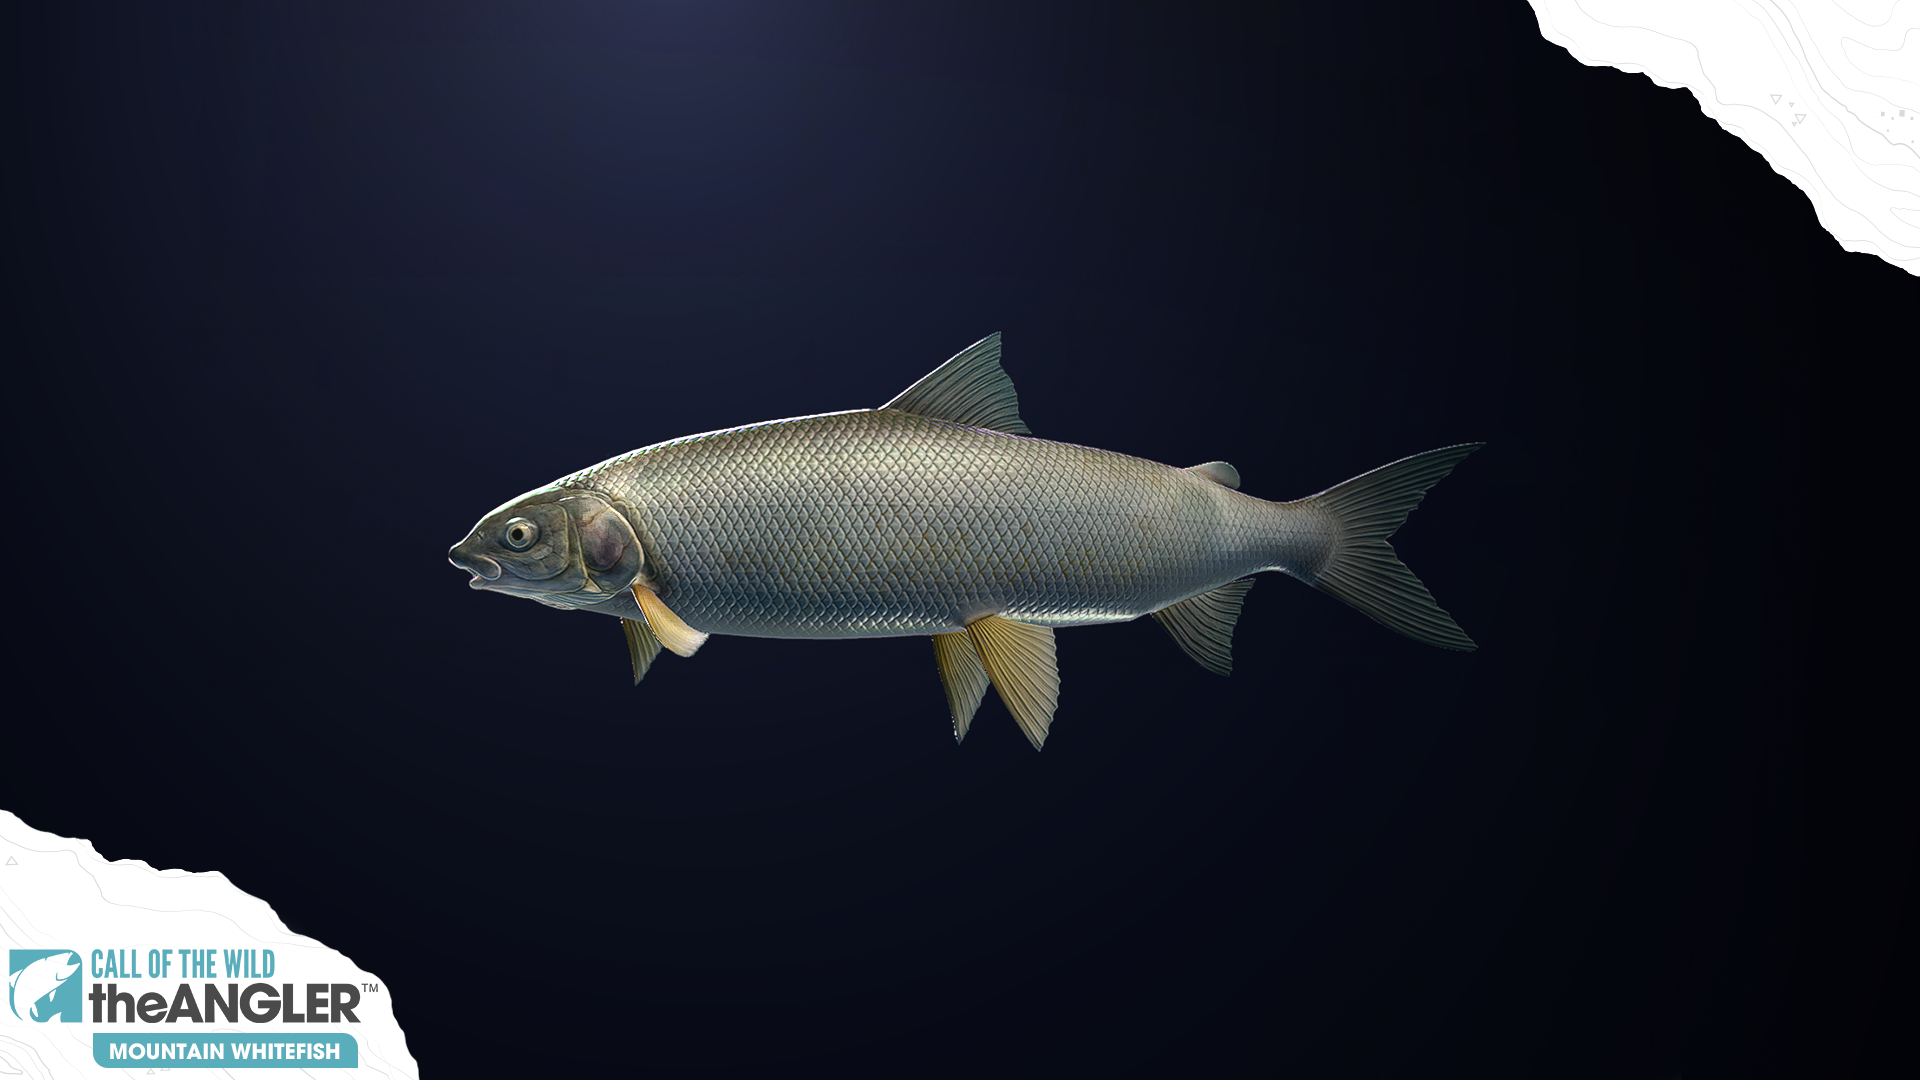 An image of the fish species, Mountain Whitefish.